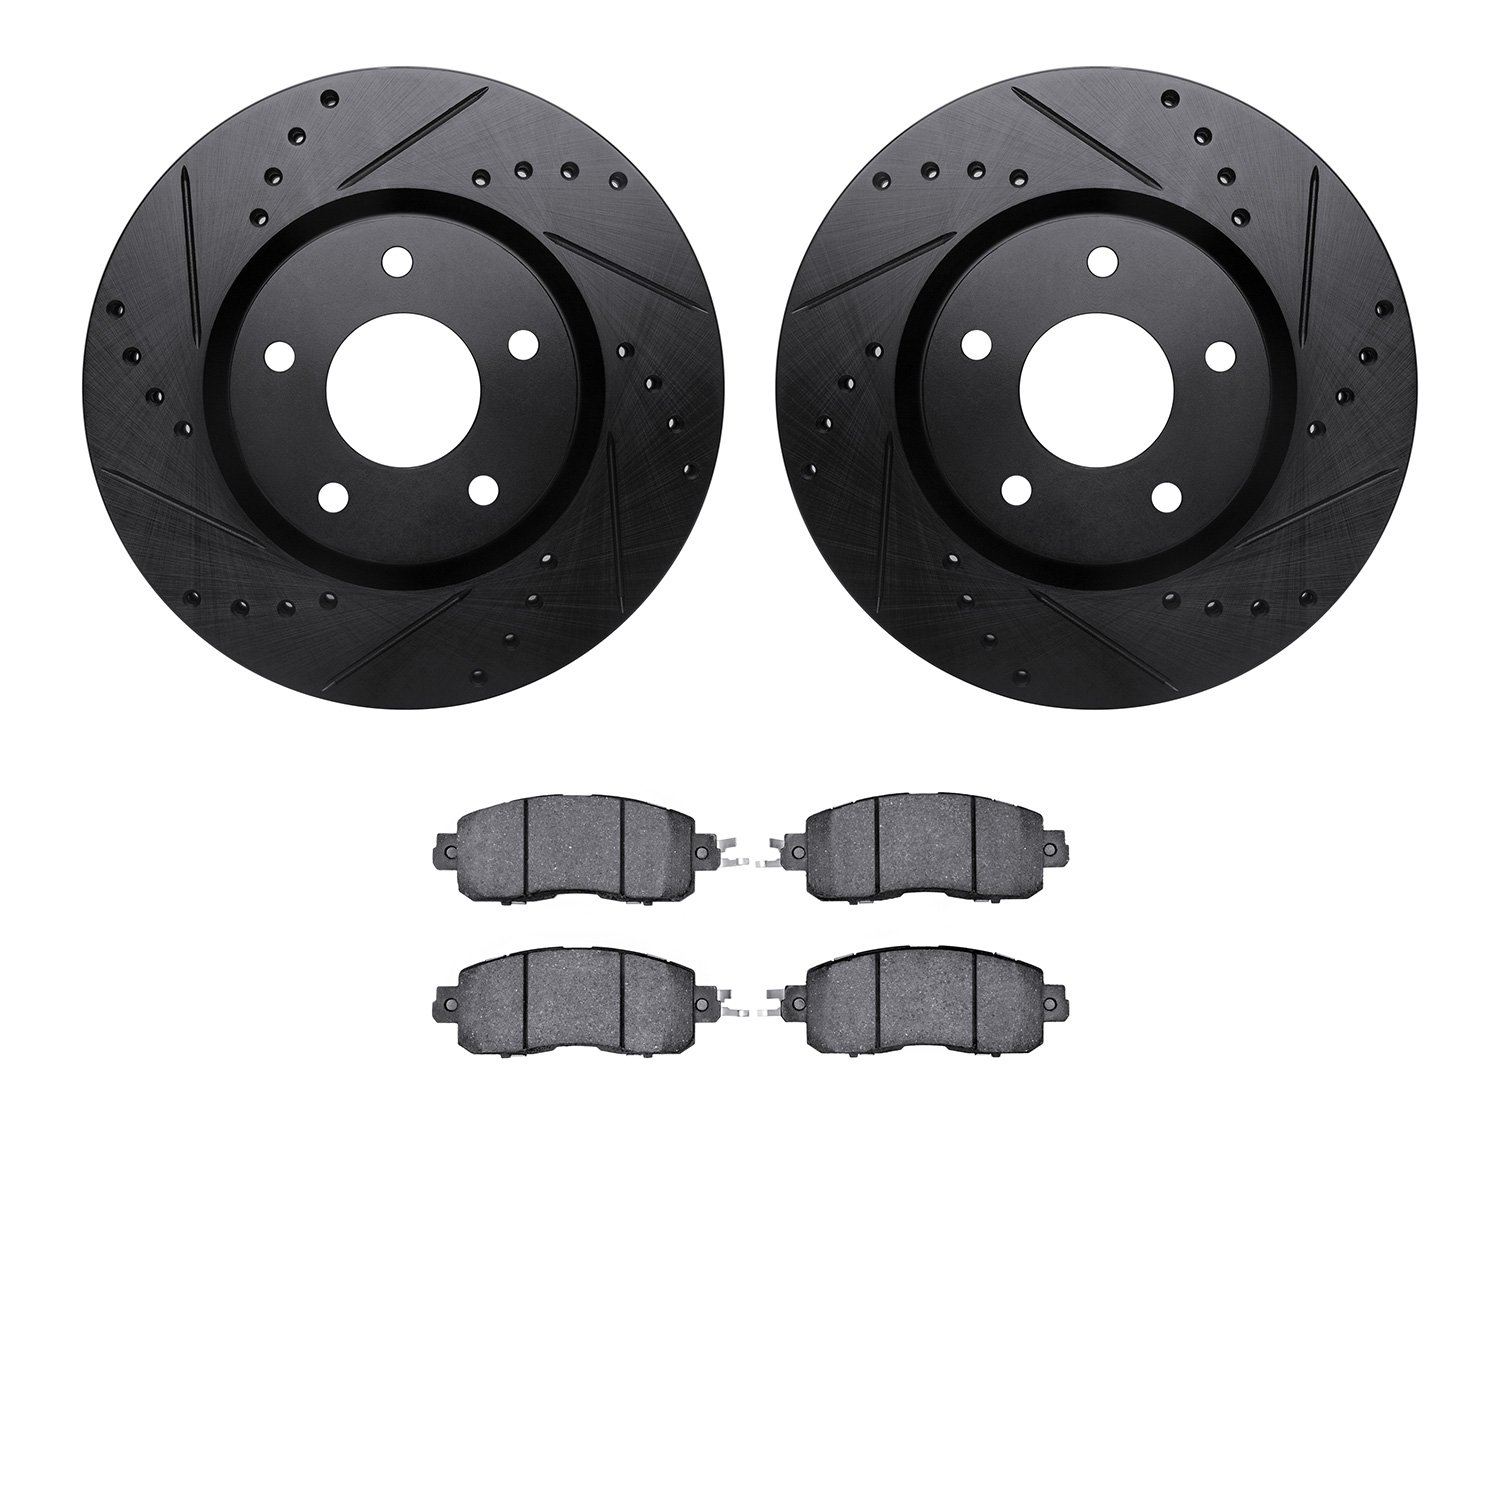 8302-67126 Drilled/Slotted Brake Rotors with 3000-Series Ceramic Brake Pads Kit [Black], Fits Select Infiniti/Nissan, Position: